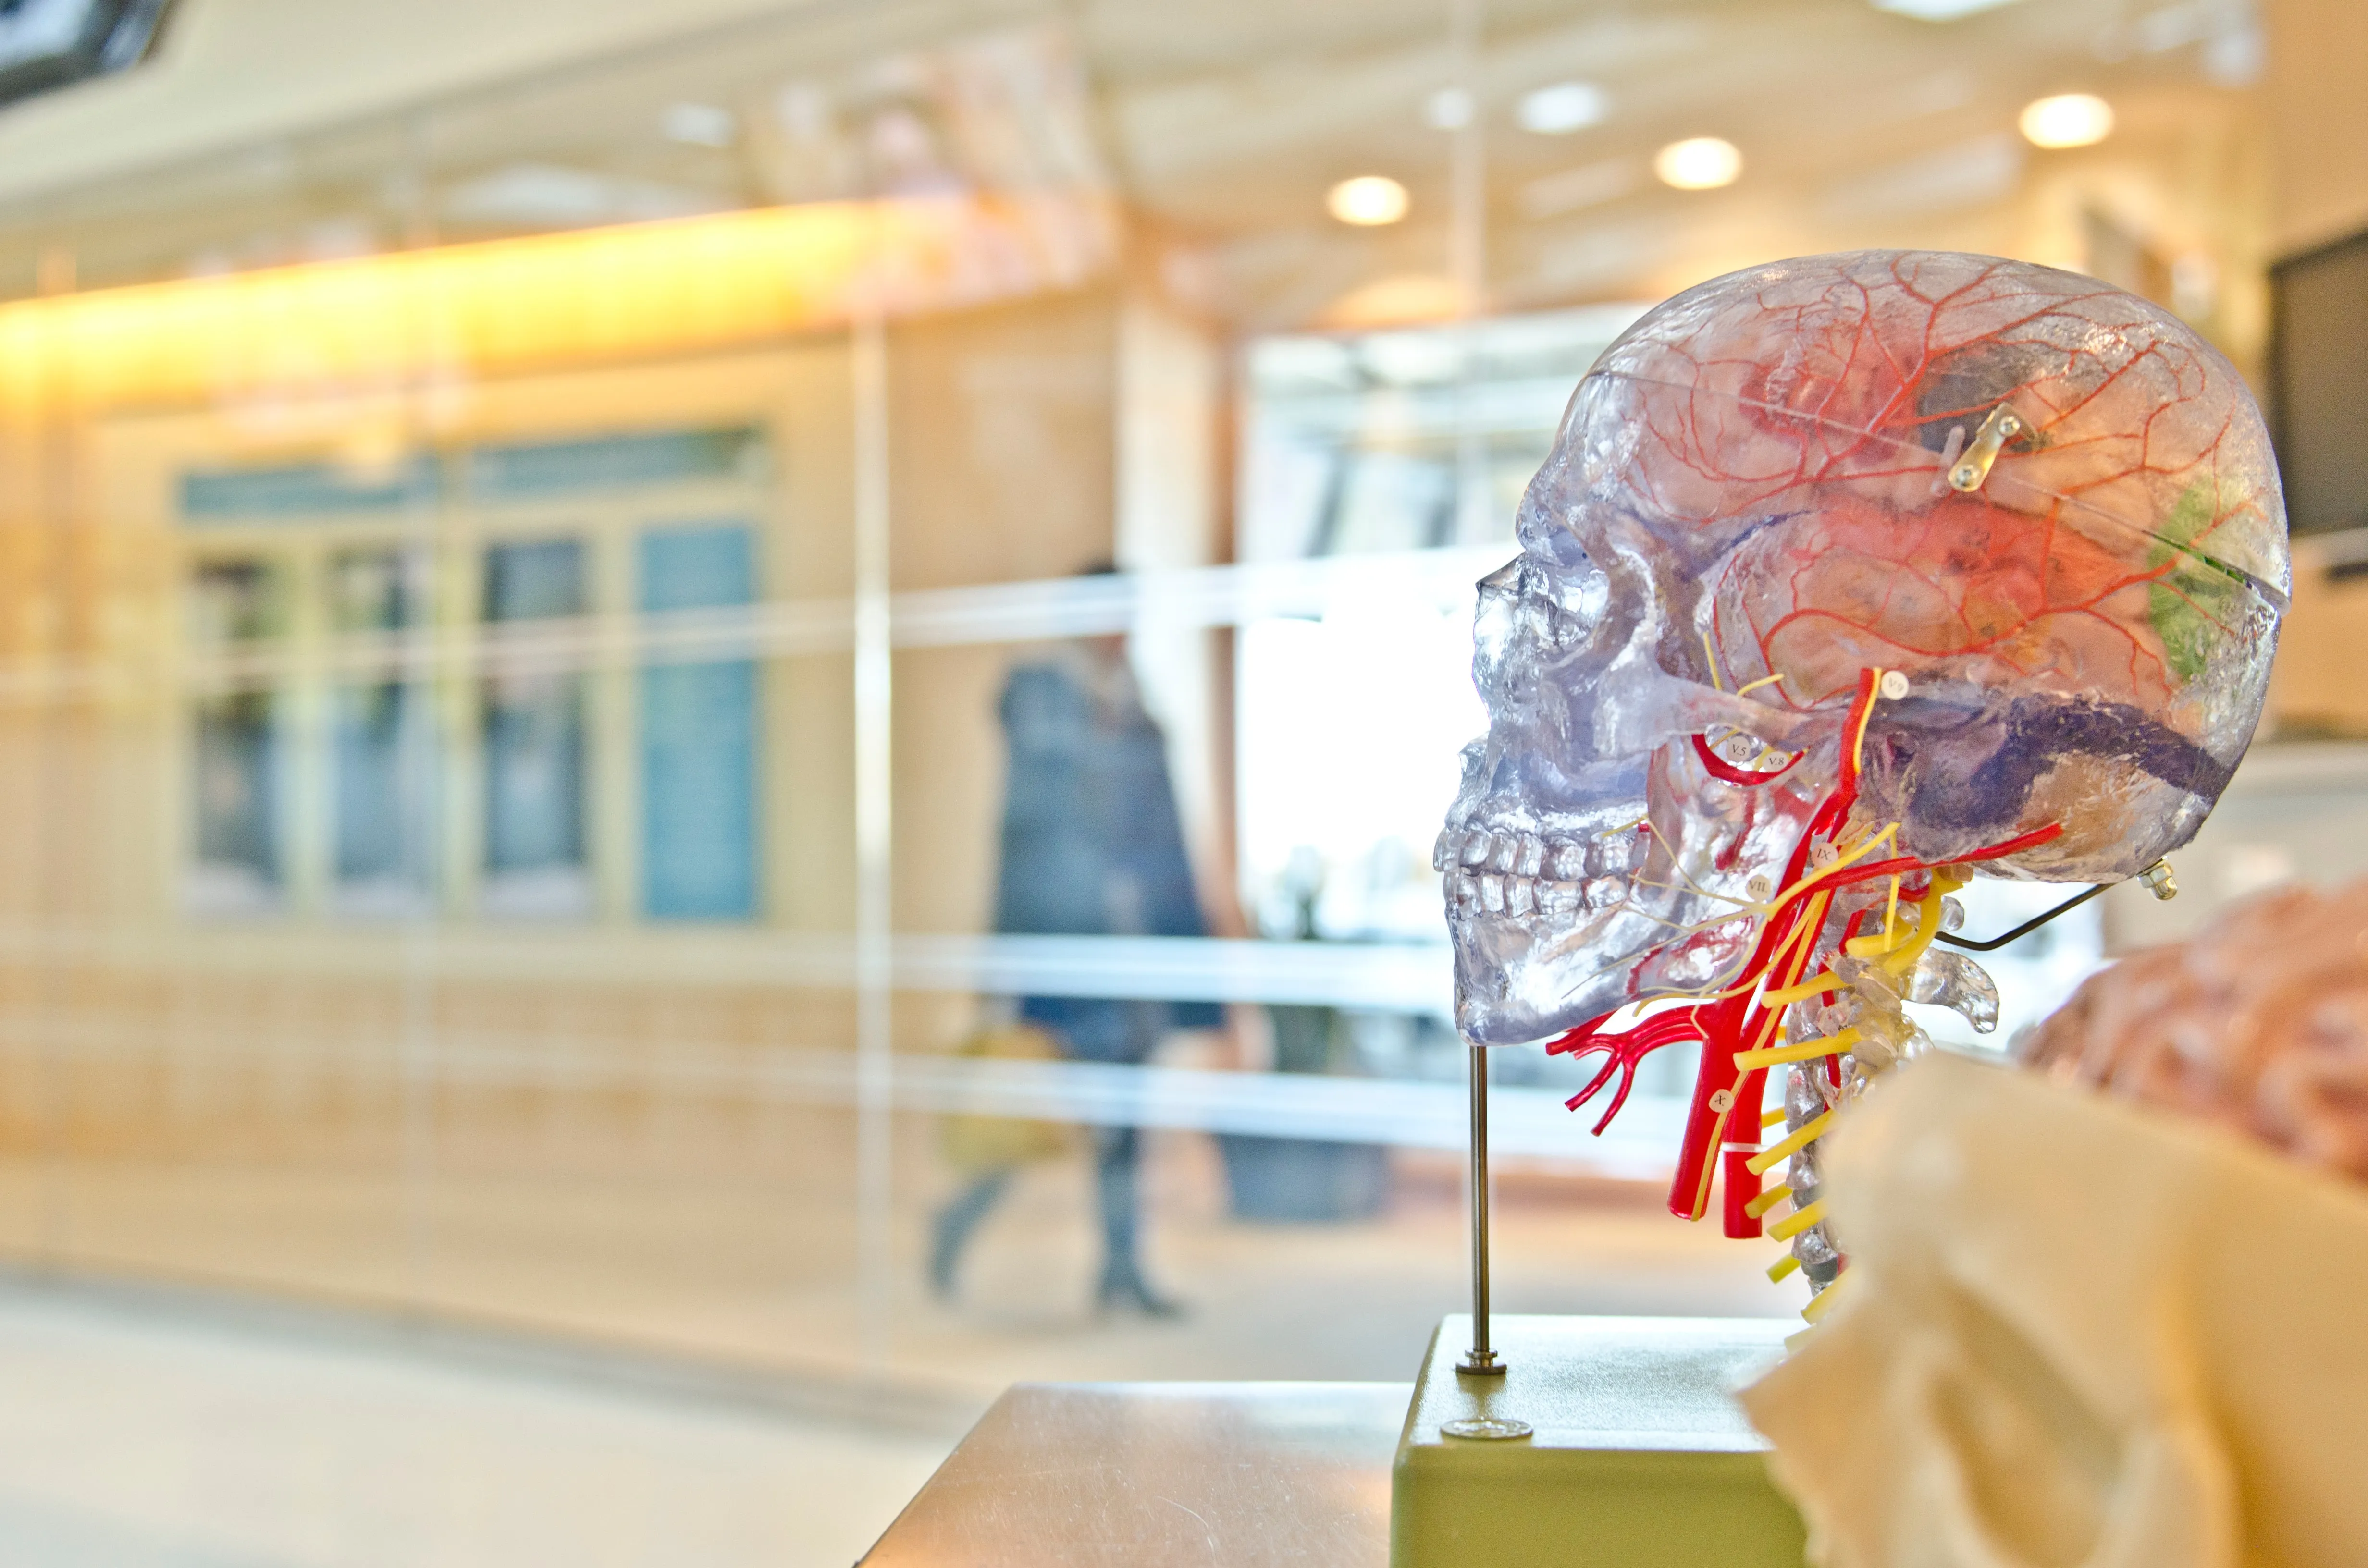 Model of Human Brain in Medical Facility